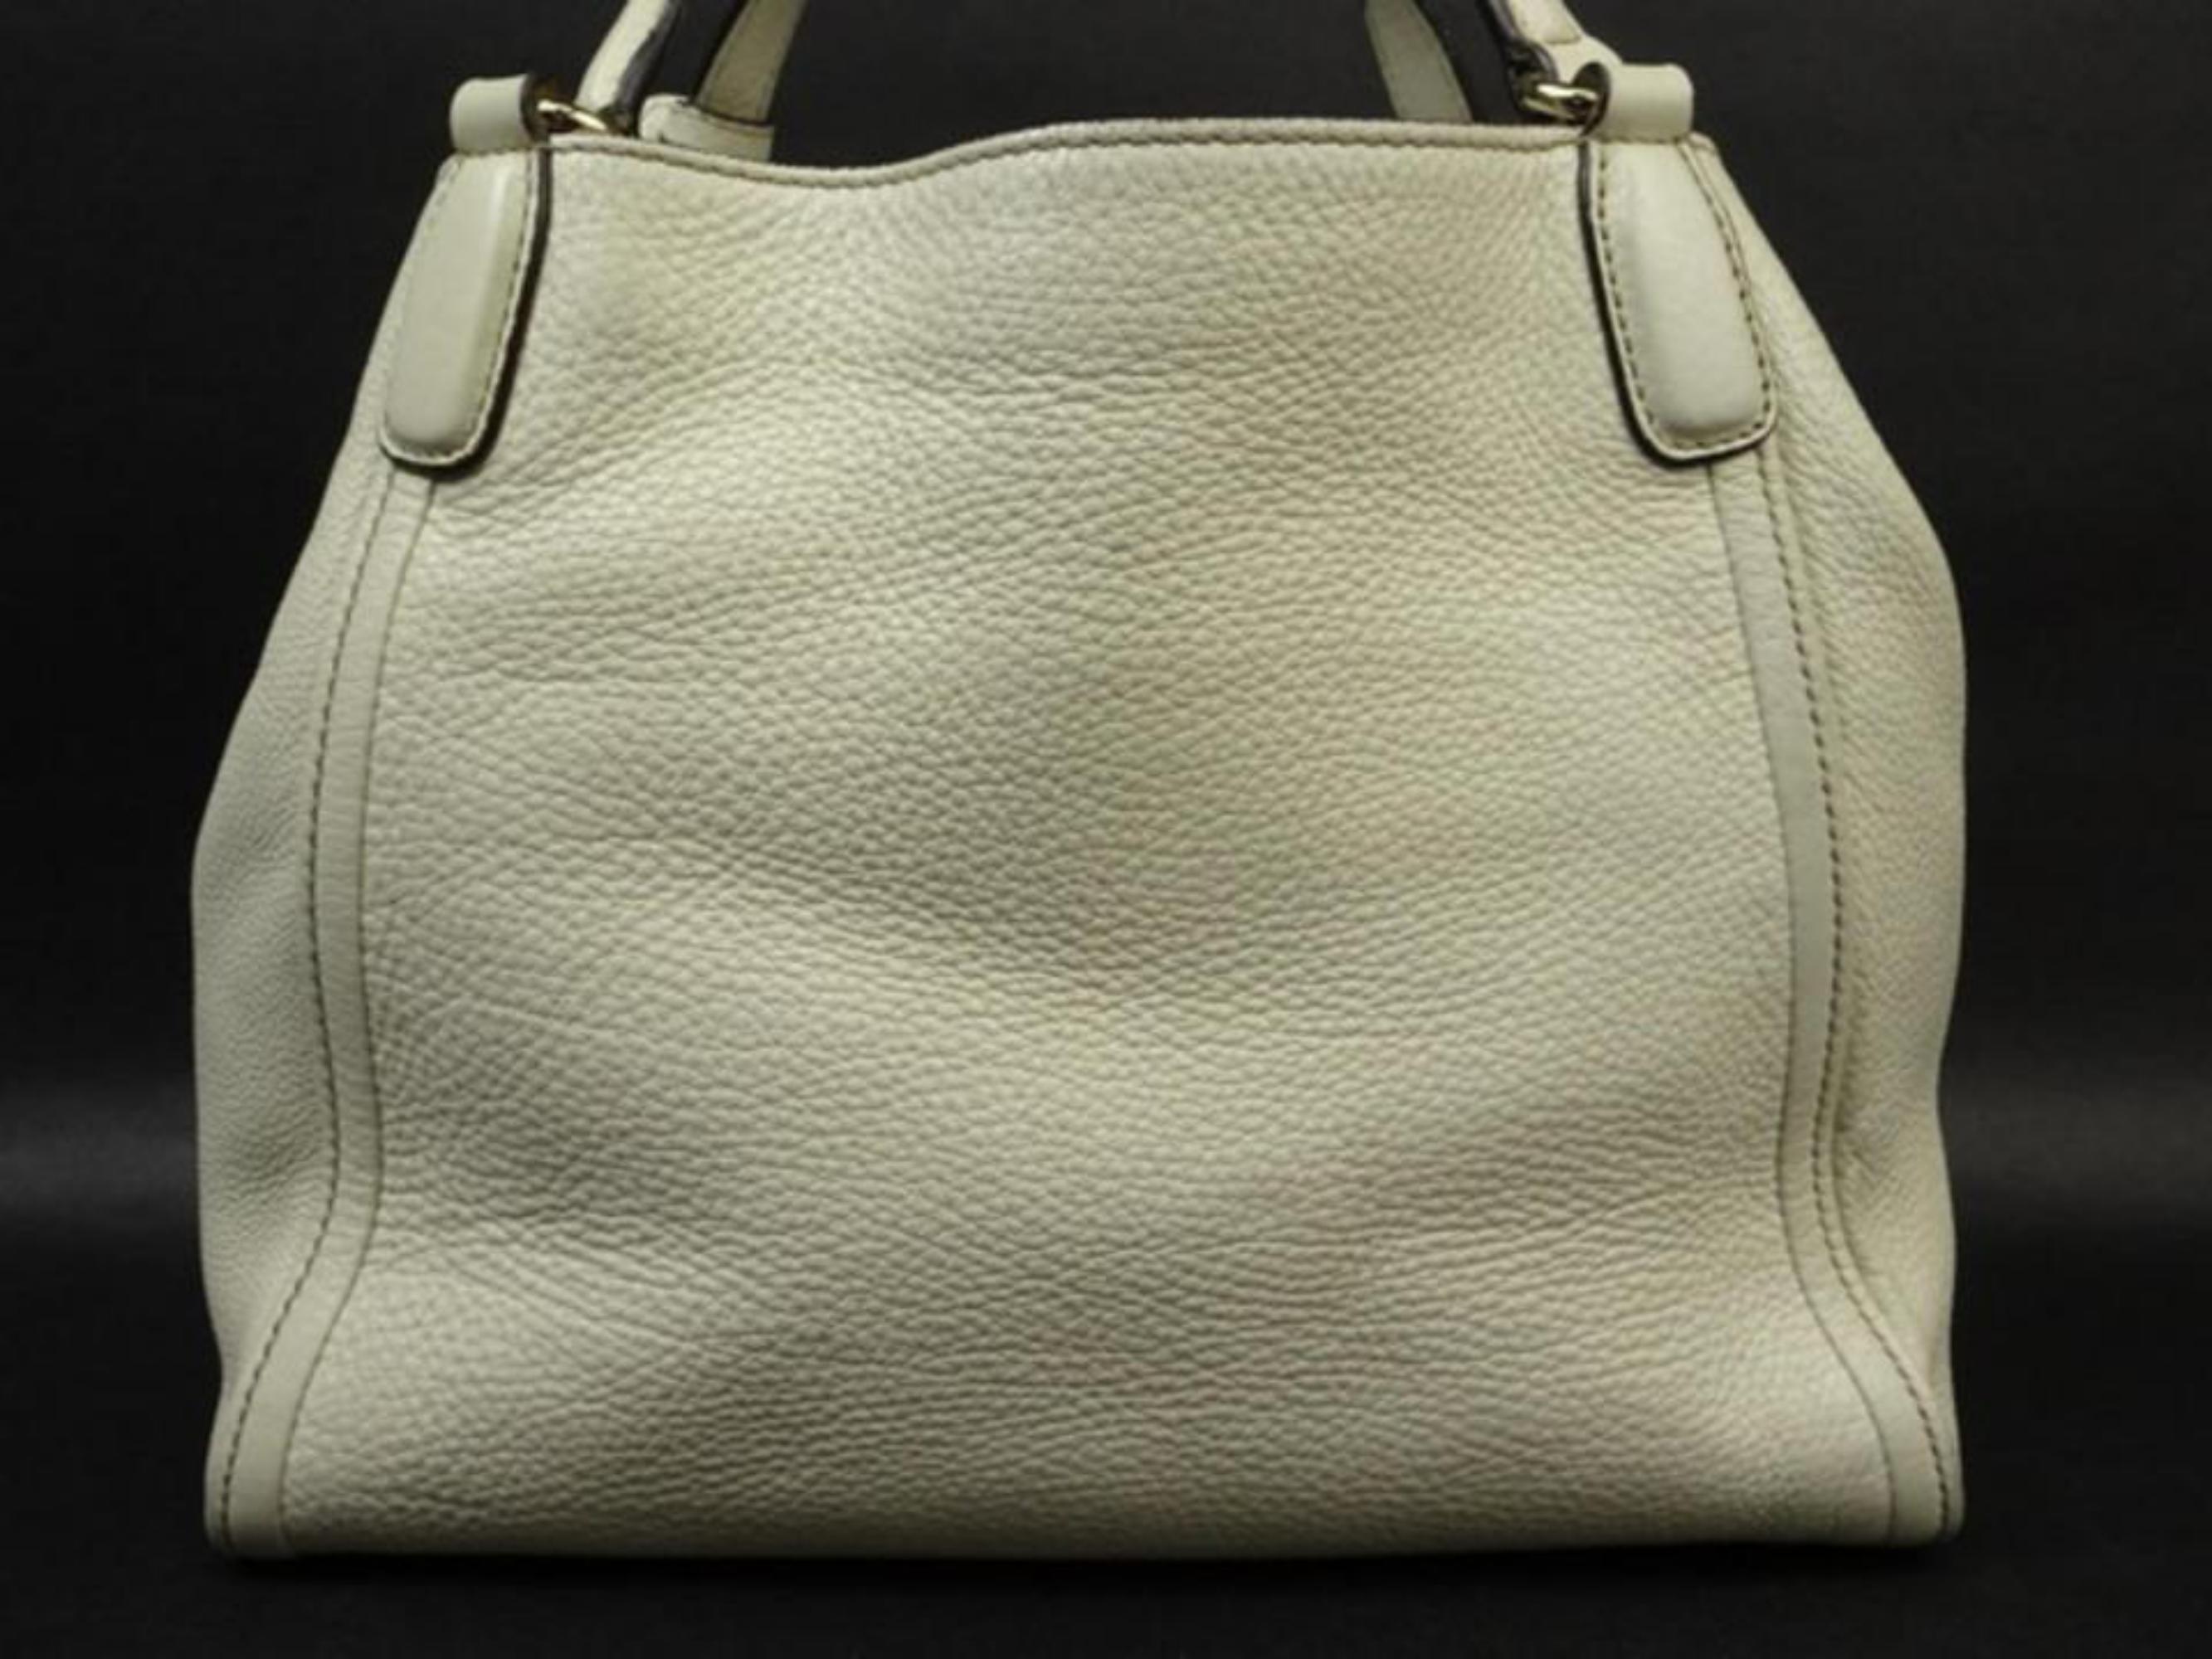 Gucci Soho Convertible 219069 Ivory Leather Shoulder Bag For Sale 1